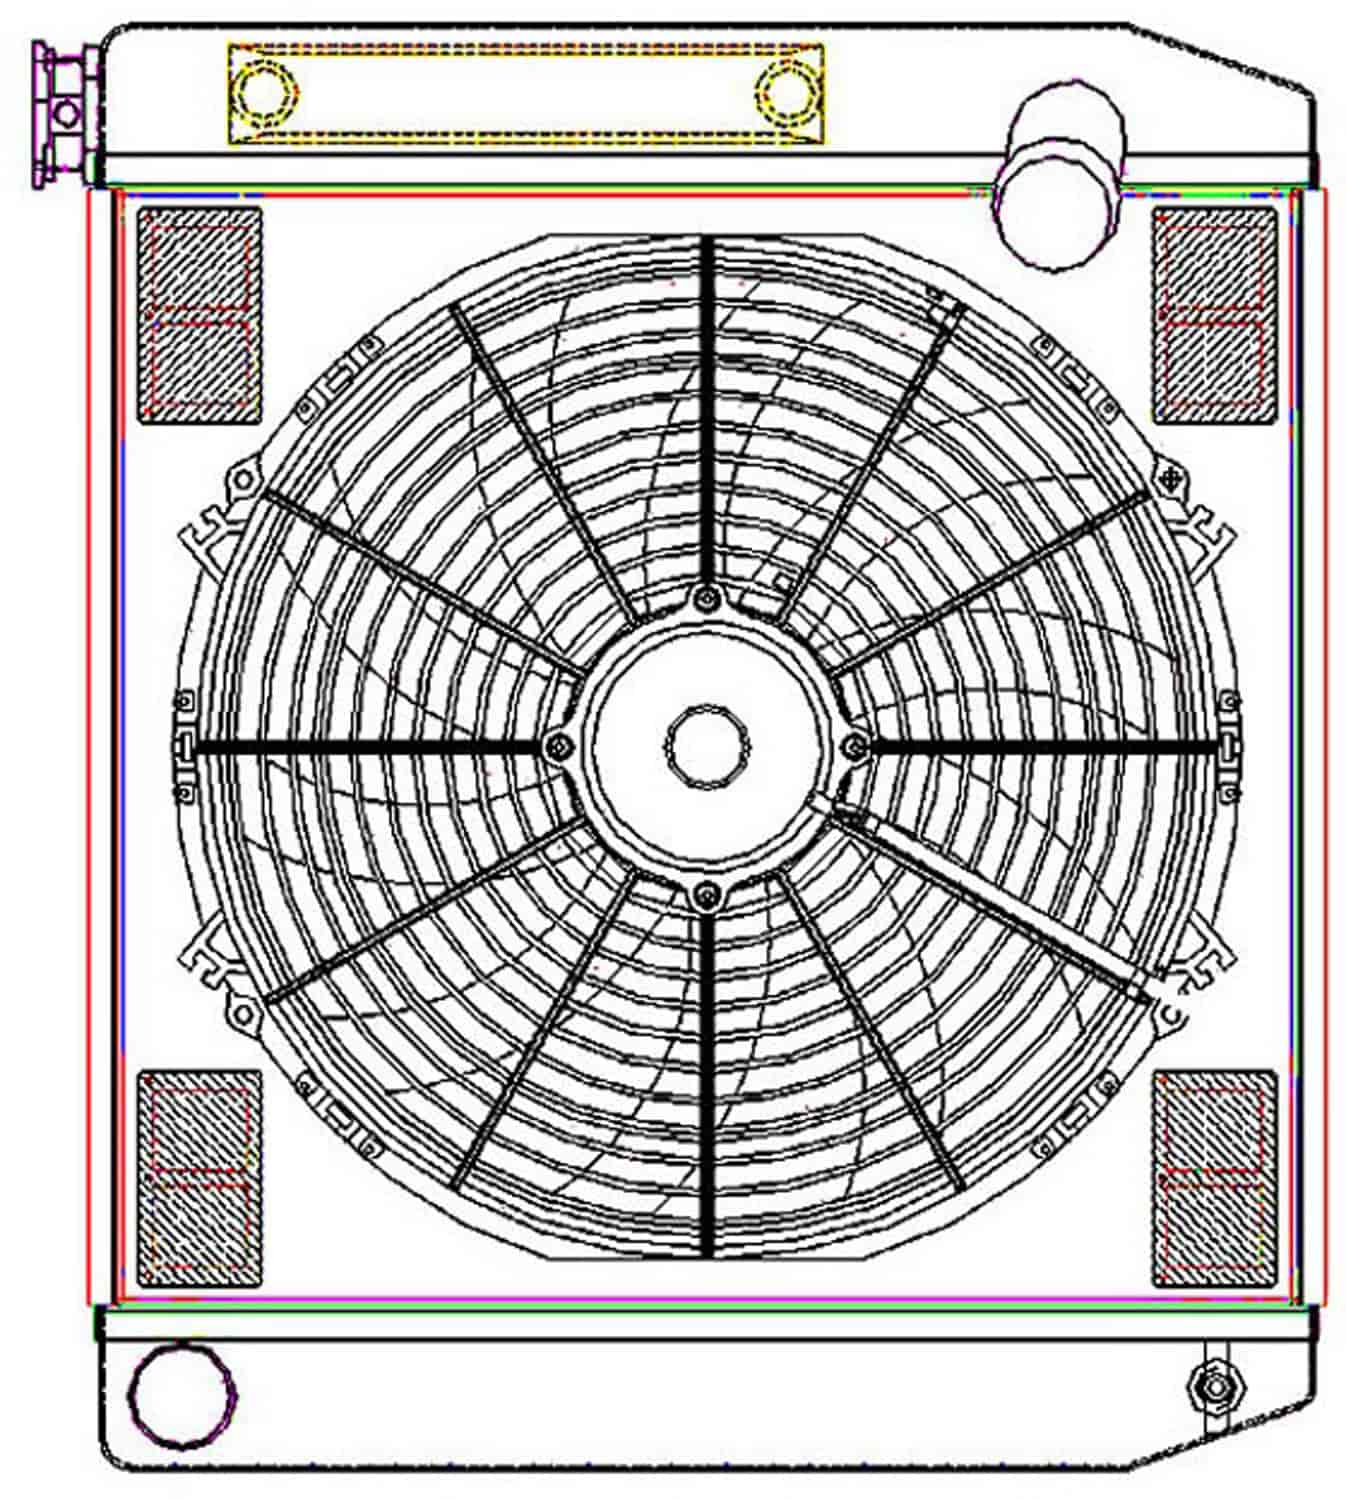 ClassicCool ComboUnit Universal Fit Radiator and Fan Single Pass Crossflow Design 22" x 19" with Transmission Cooler